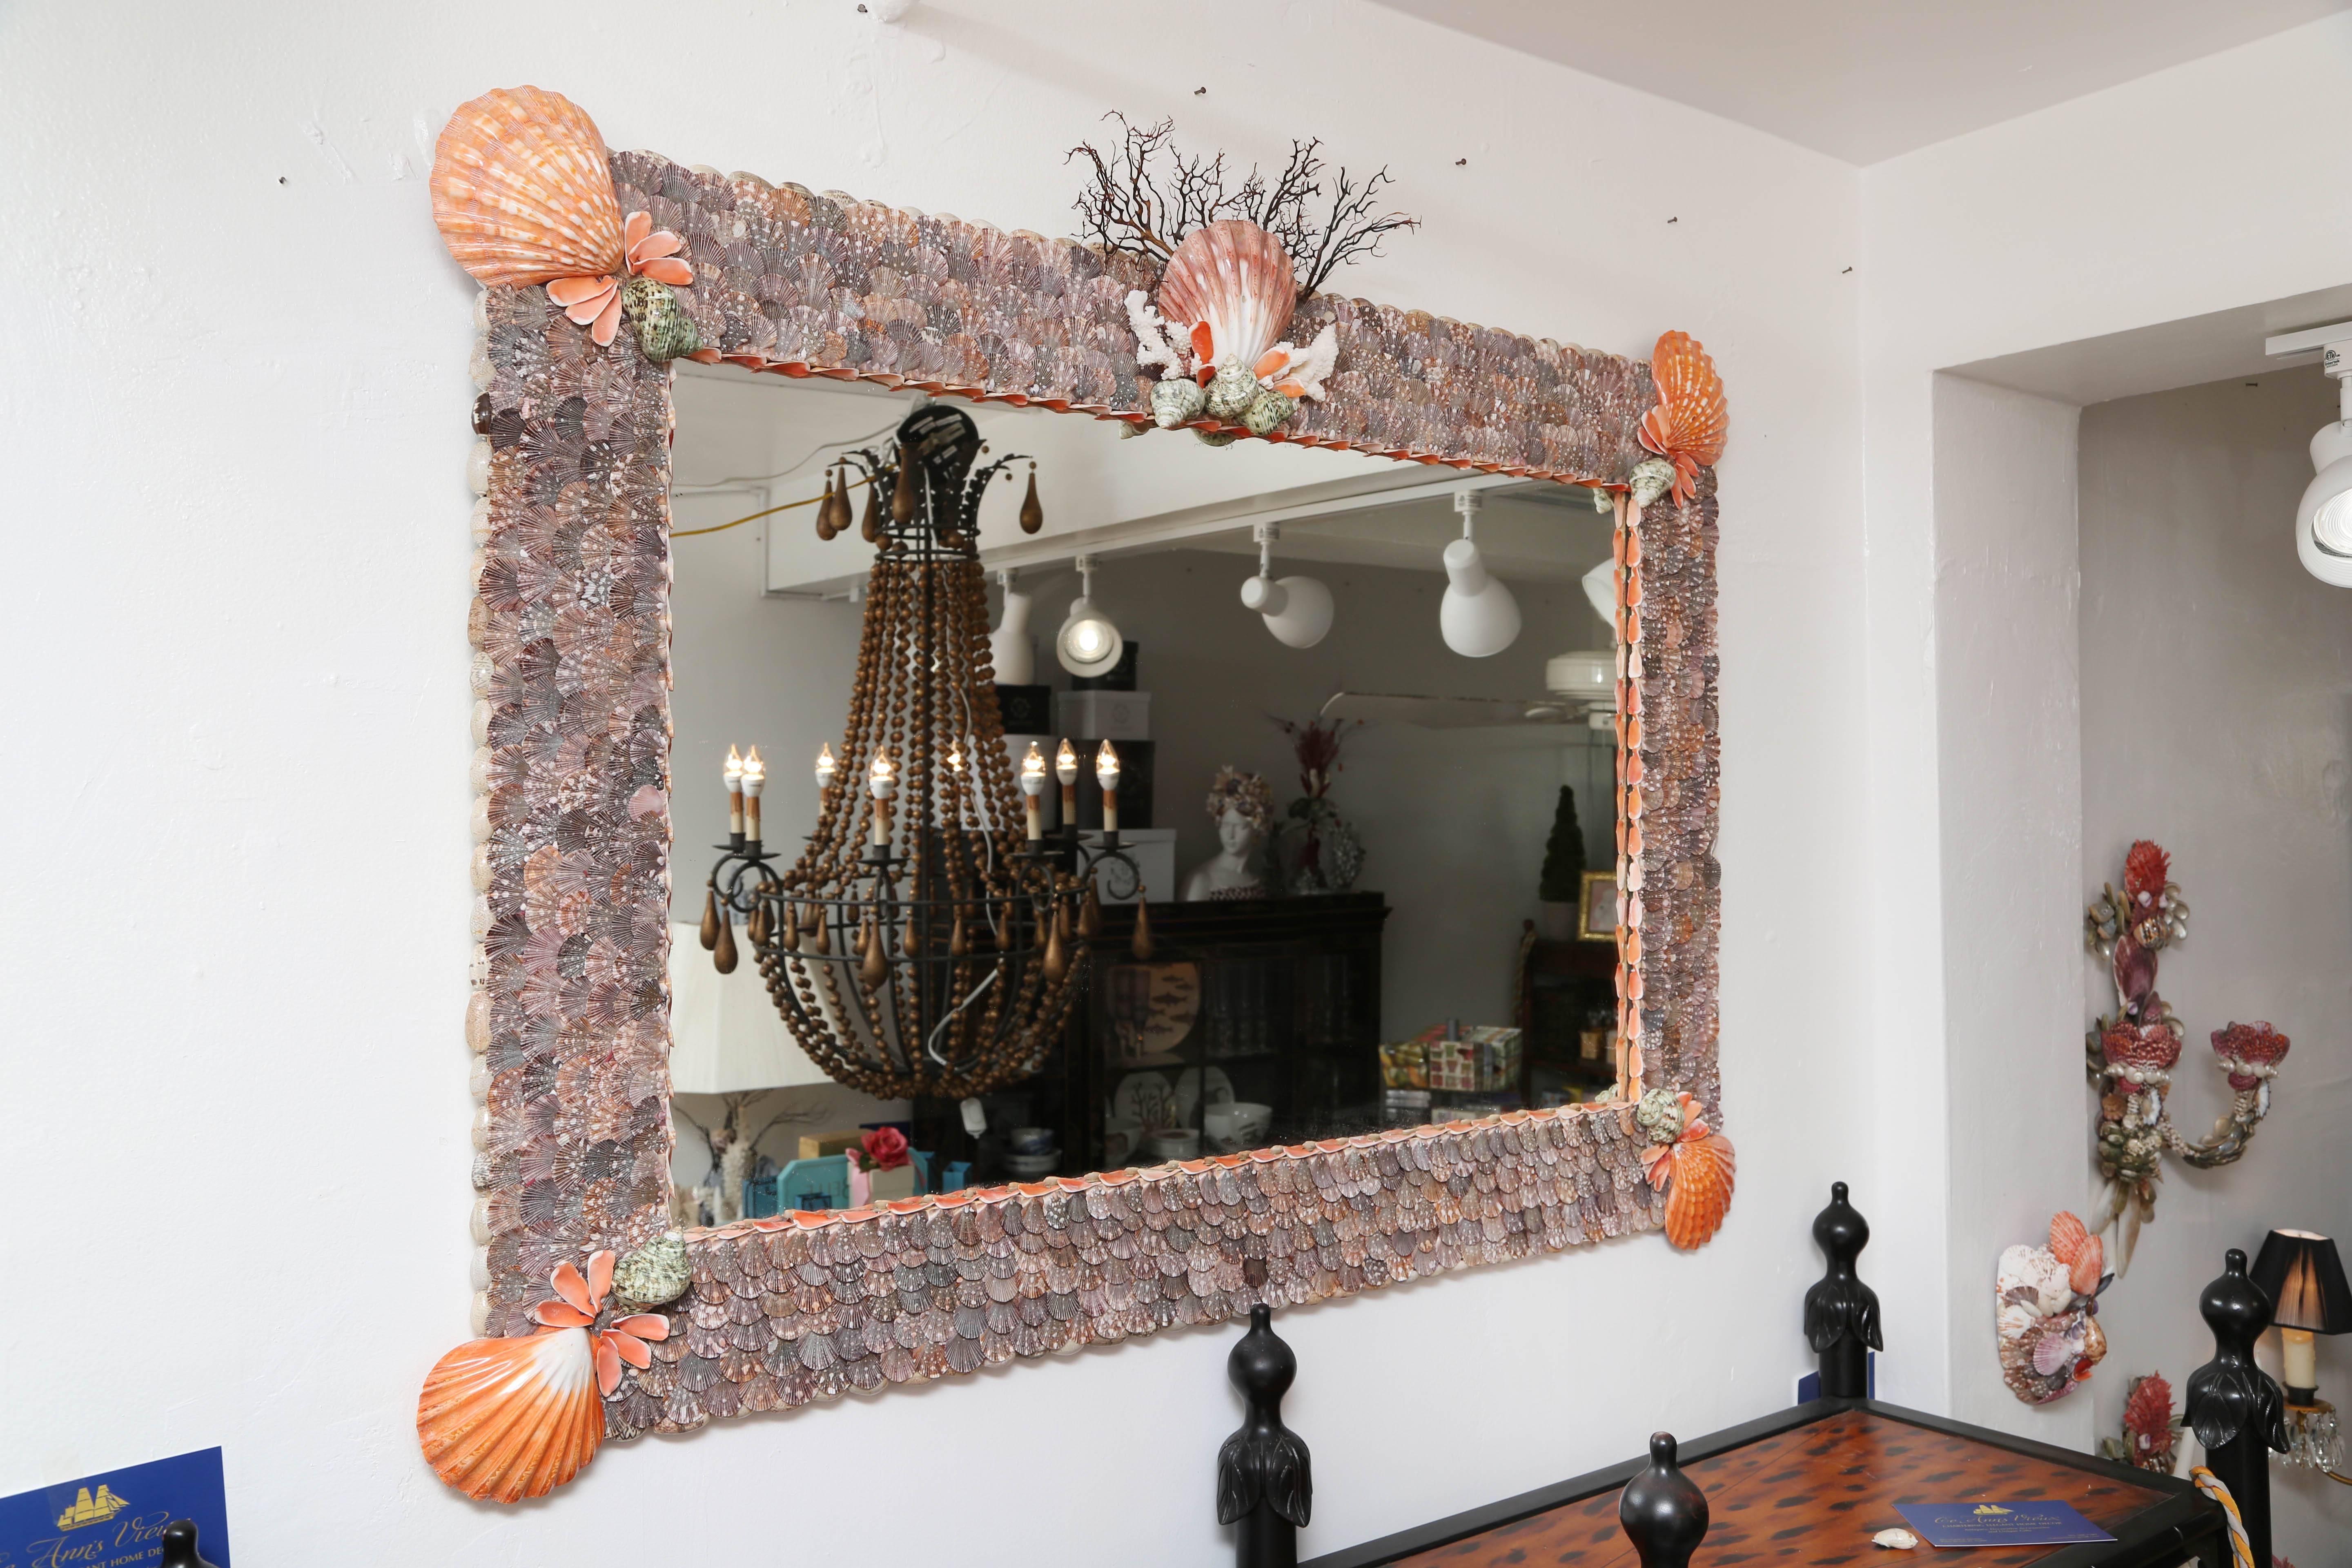 Handcrafted seashell mirror featuring high quality specimen seashells. Organic colors of burnt brown shells are complimented with striking orange large scallop seashells on the corners. White coral and dried seaweed accent the top of the mirror.